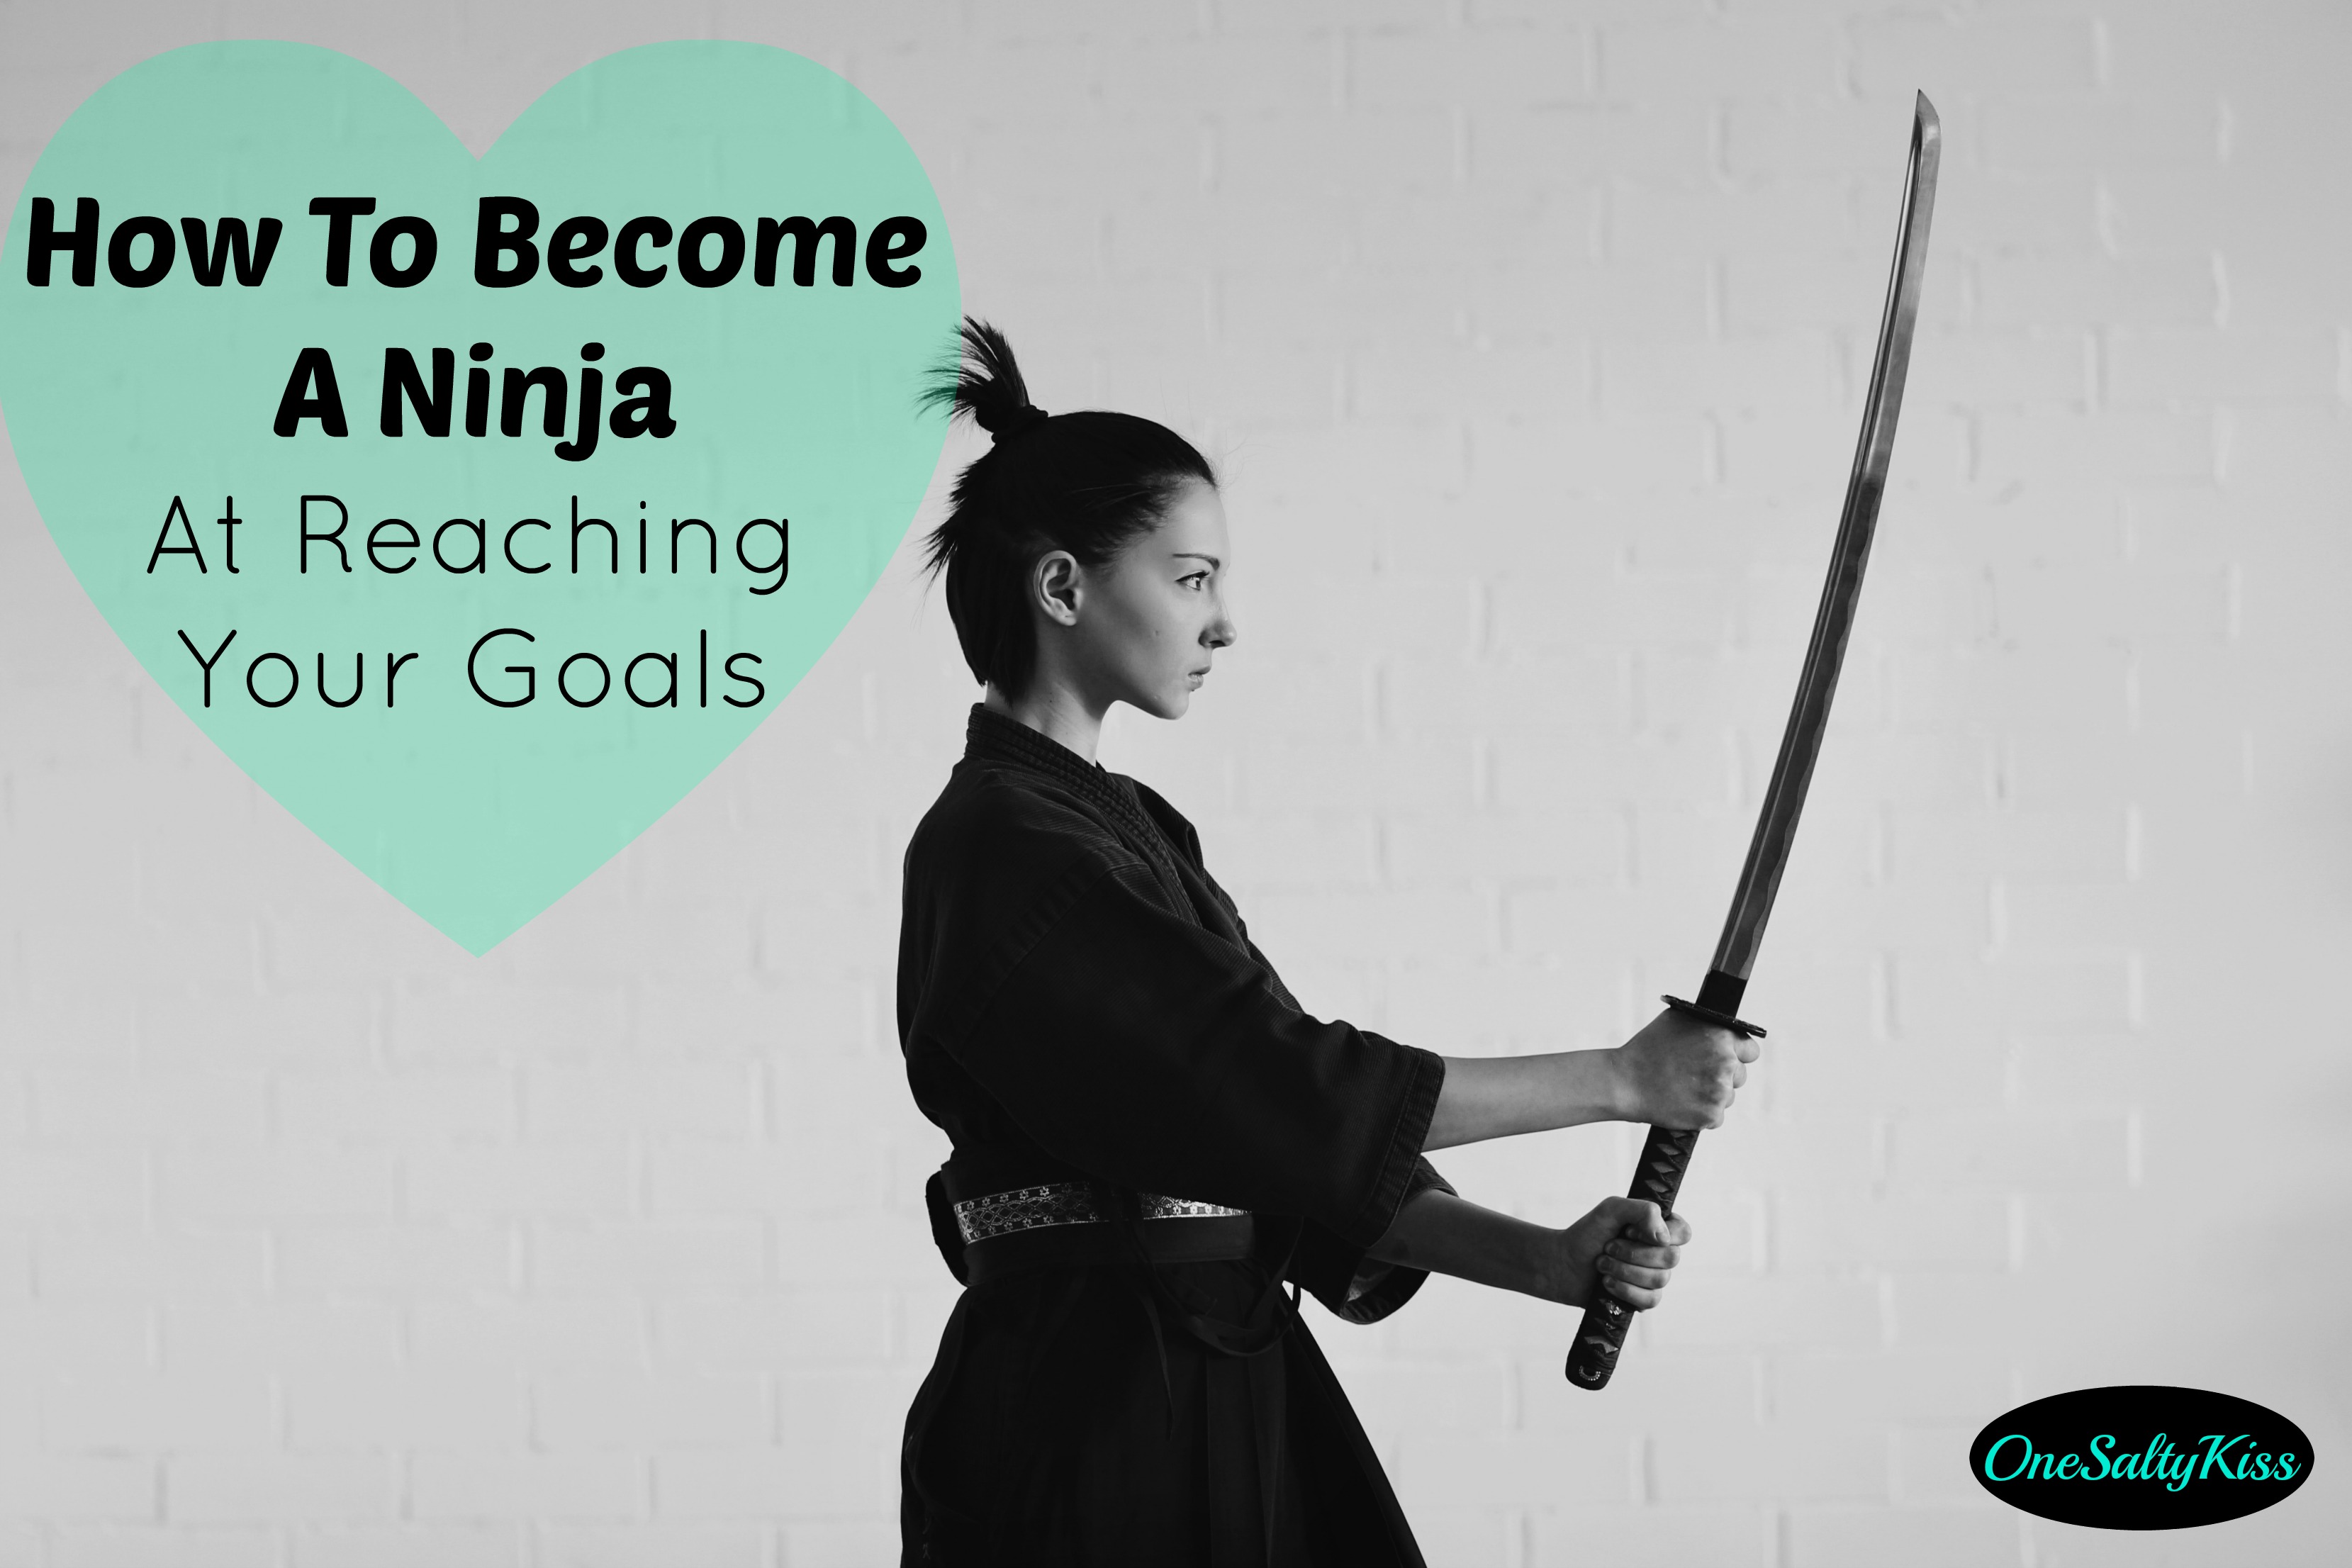 How To Become A Ninja At Reaching Your Goals